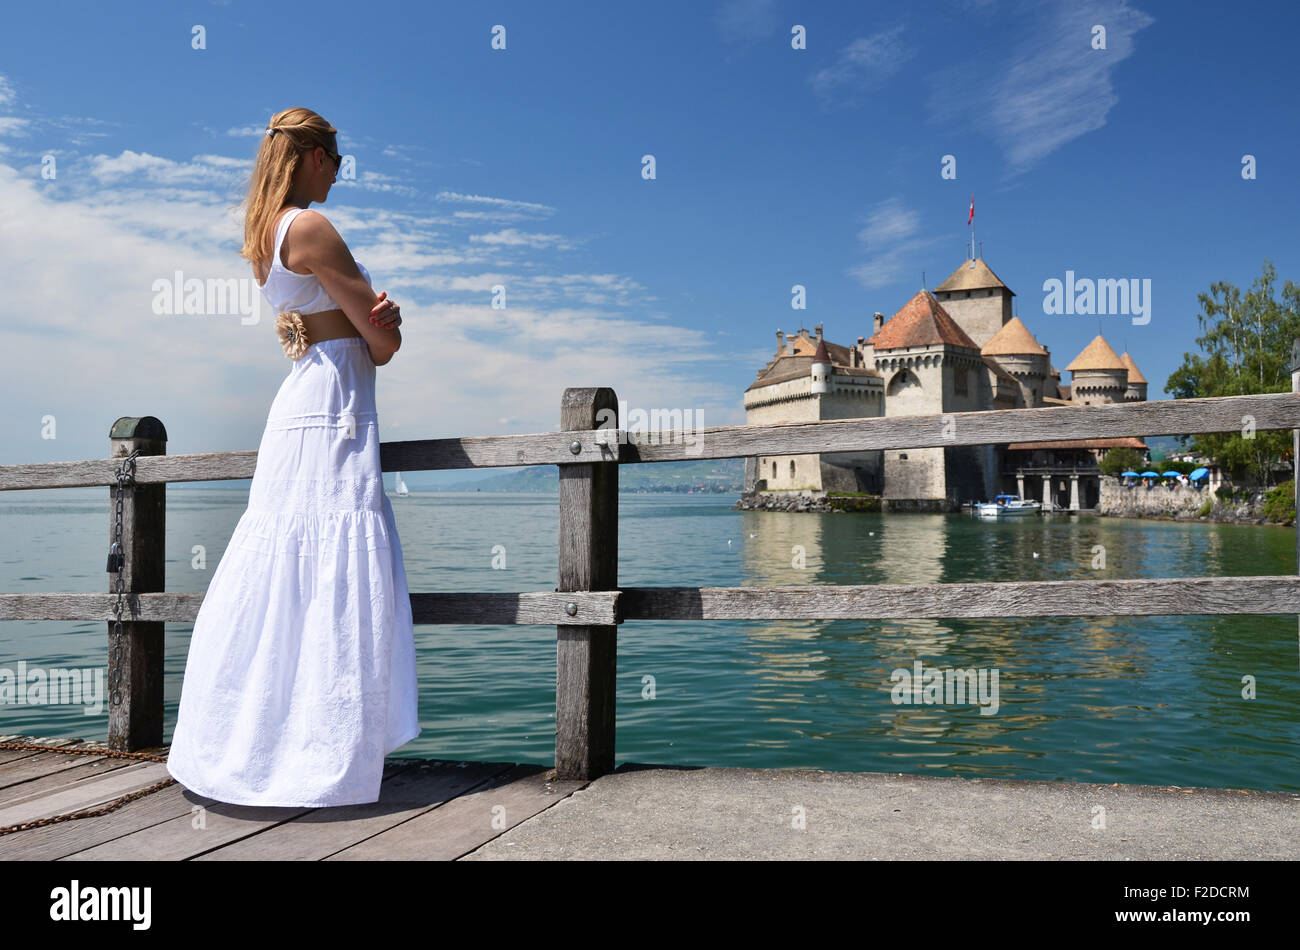 Young woman looking at Chillion castle, Switzerland Stock Photo